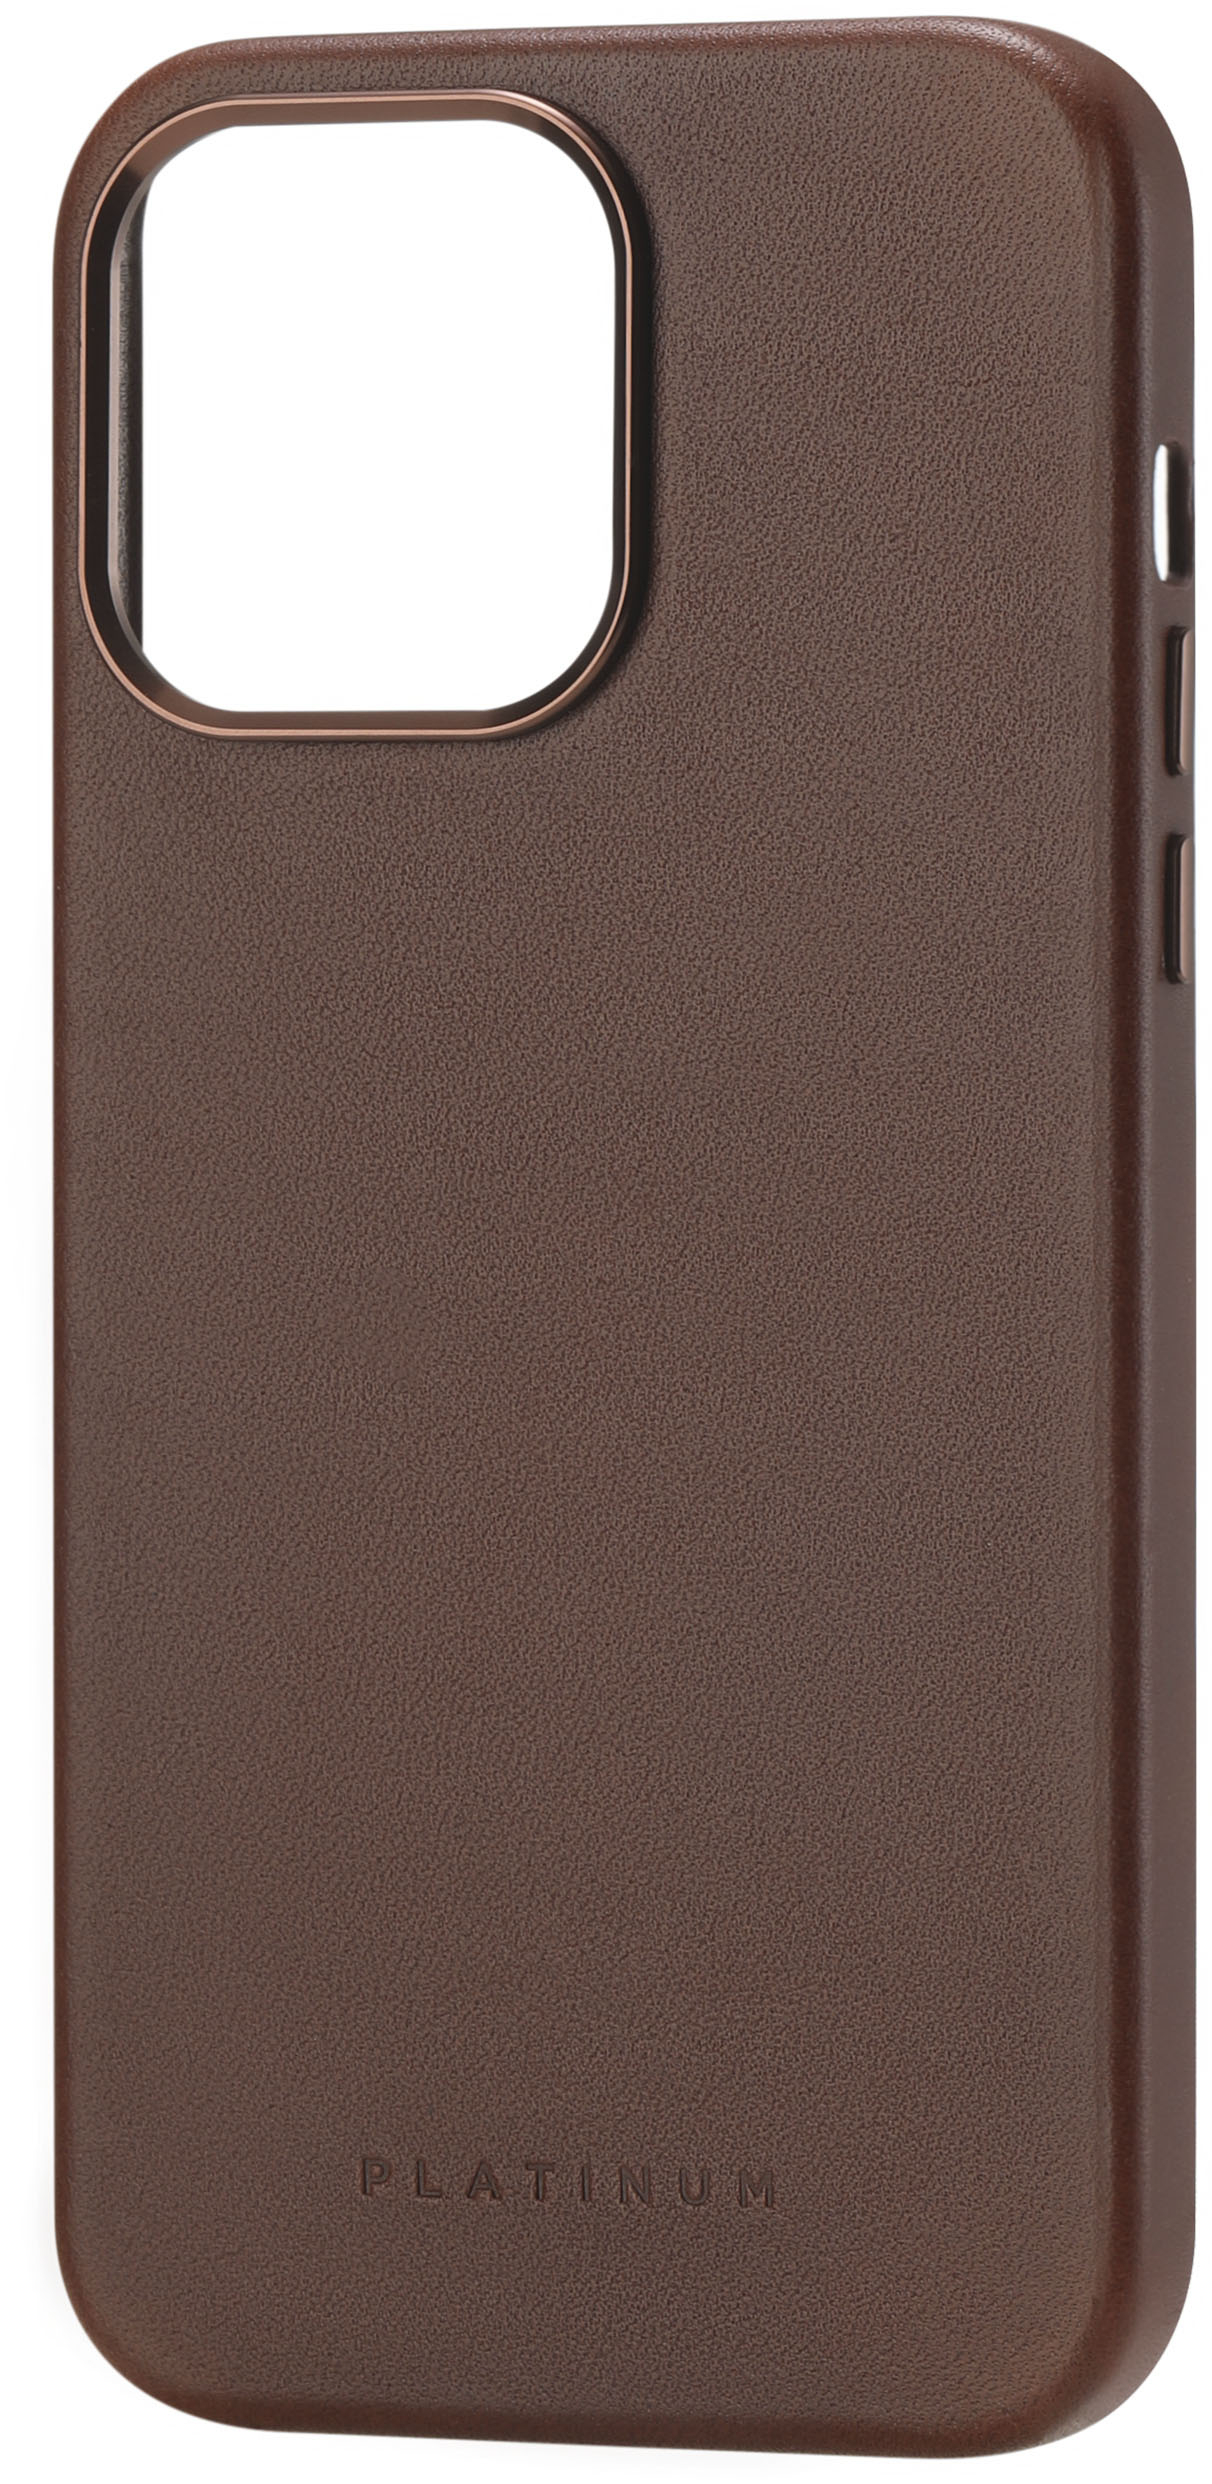 HBD Logo Cut Leather Case For iPhone 13 Series 